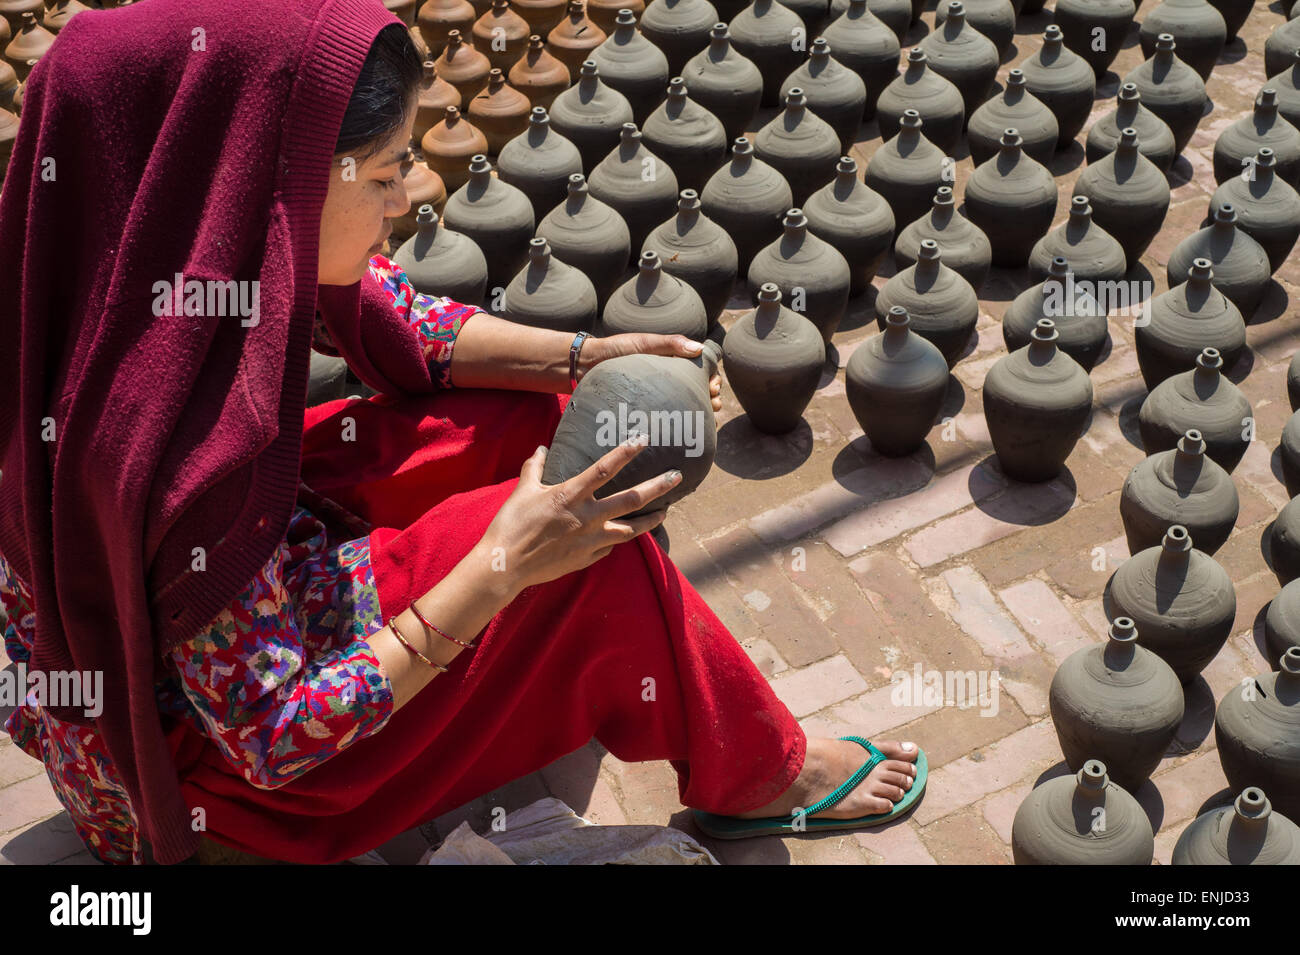 Bhaktapur, Nepal - 20 march 2015: Woman placing potteries to dry on Pottery Square. Stock Photo